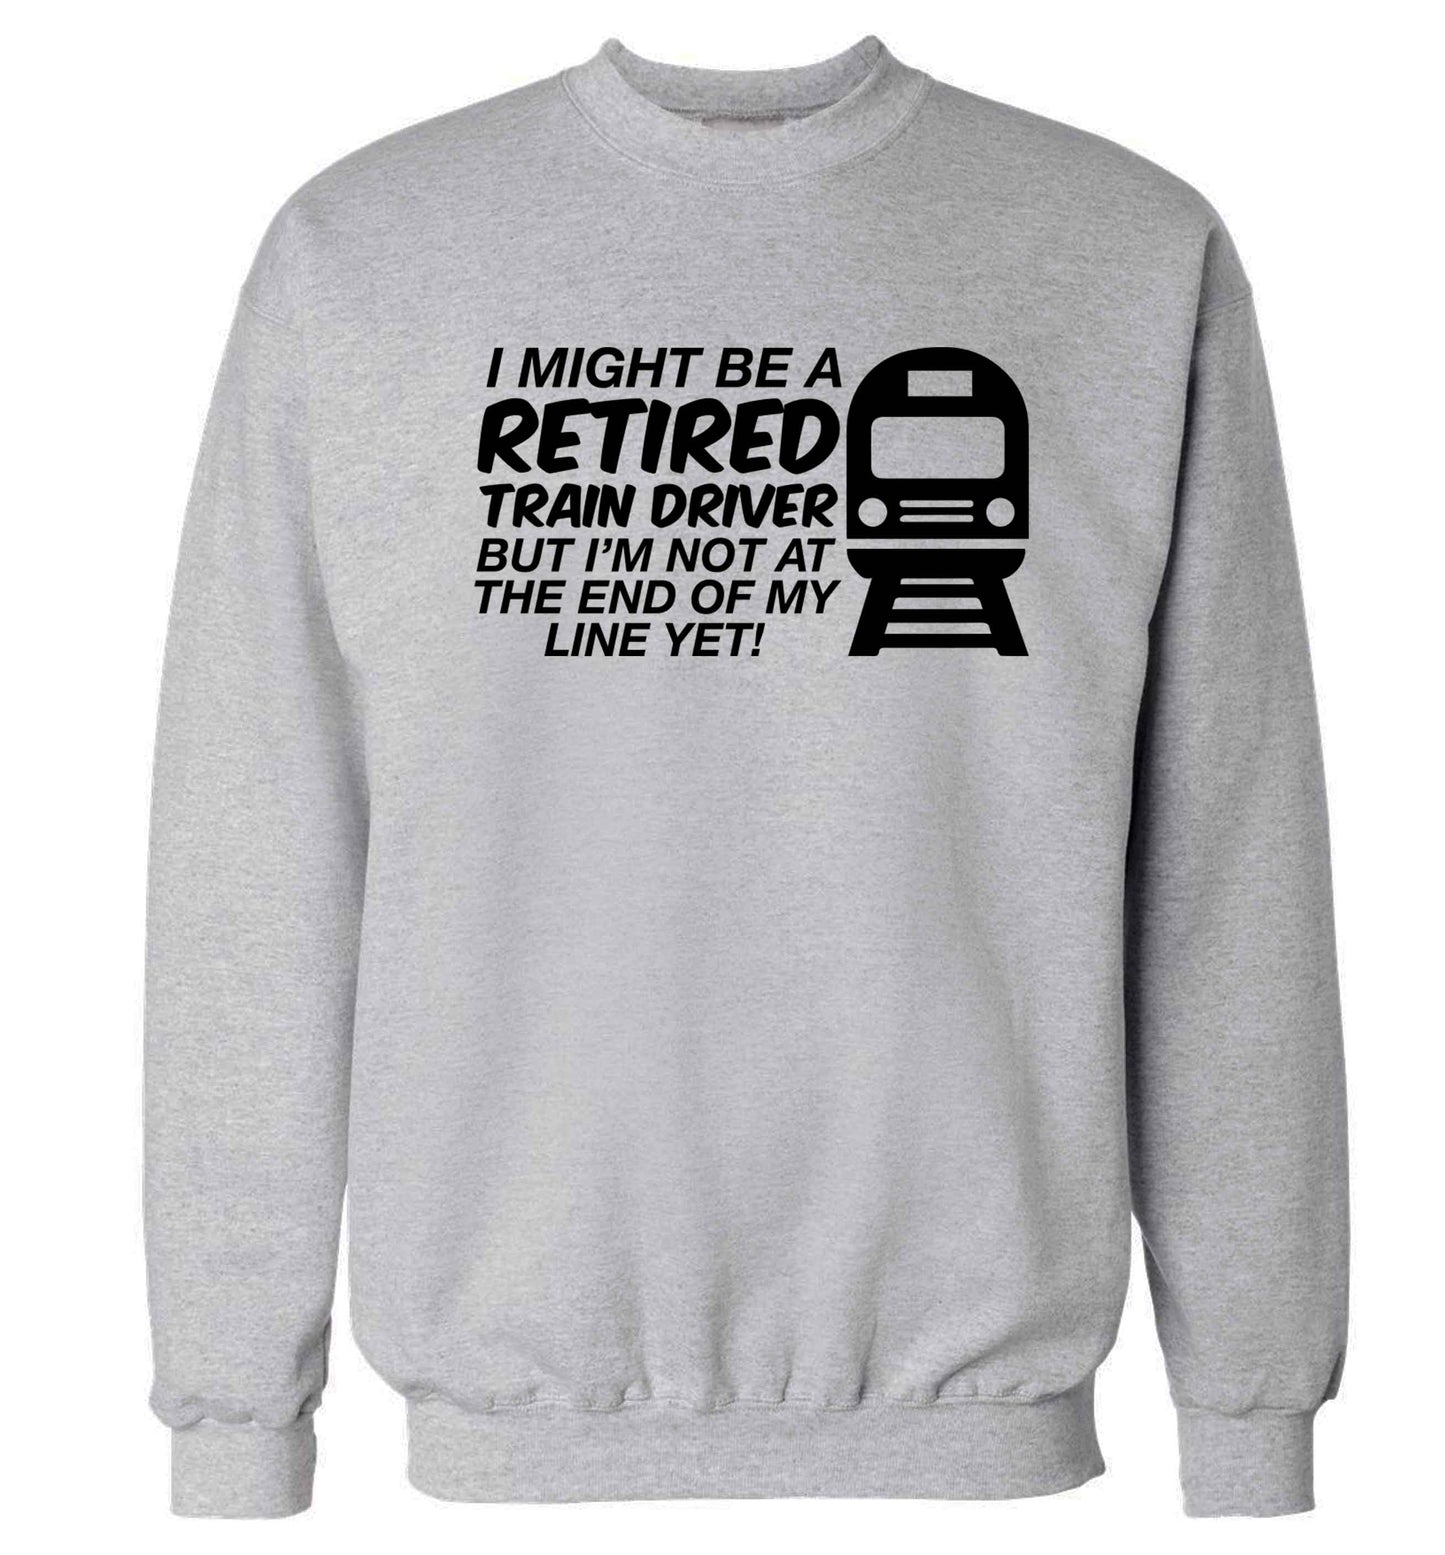 Retired train driver but I'm not at the end of my line yet Adult's unisex grey Sweater 2XL